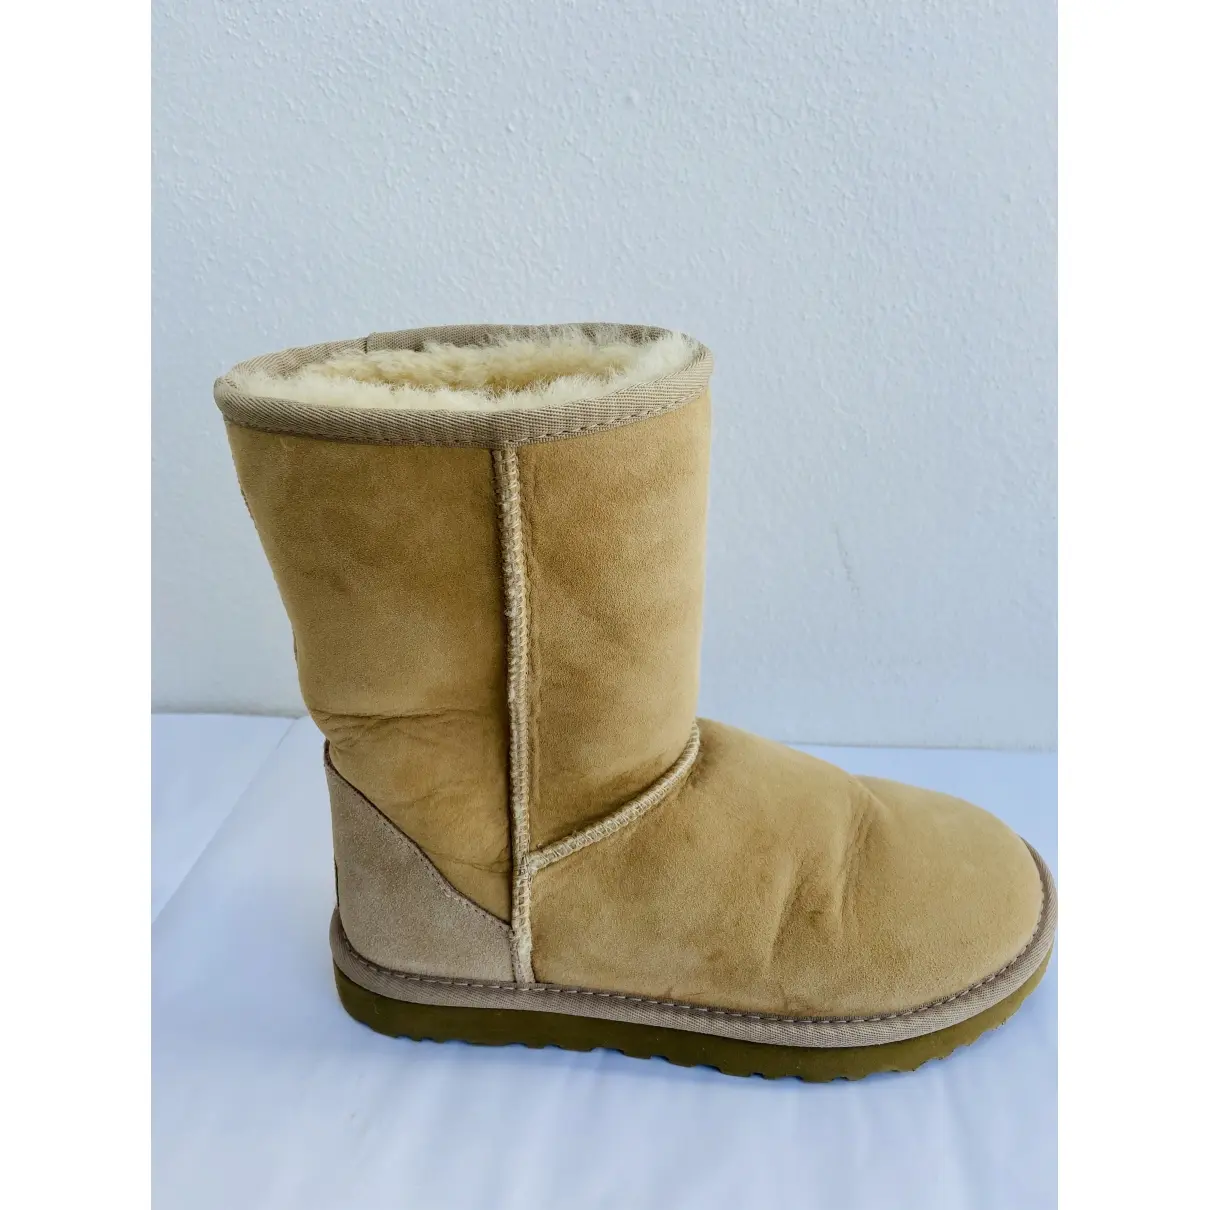 Ugg Leather boots for sale